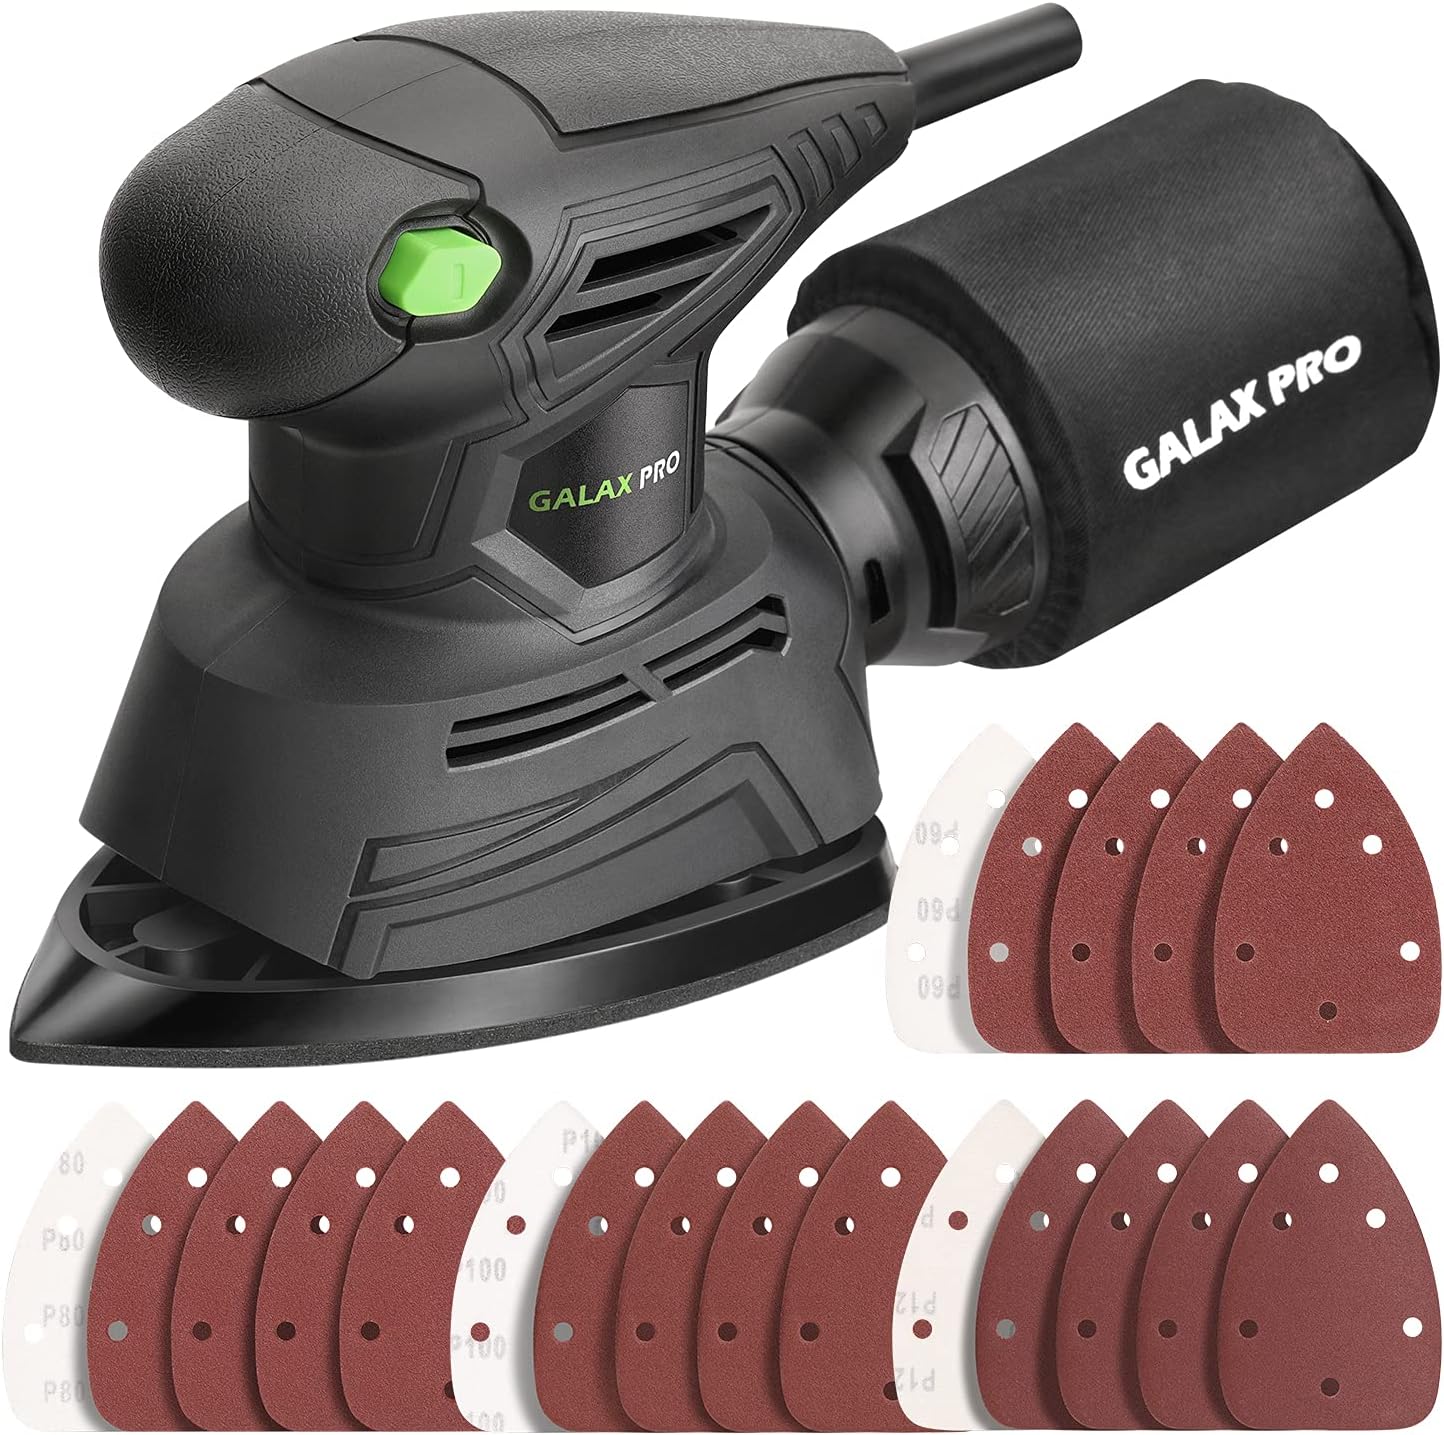 GALAX PRO Detail Sander, 1.1A Powerful Motor, 14000 OPM Compact Electric Sander with 16Pcs Sandpapers and Dust Bag, Soft Grip Handle for